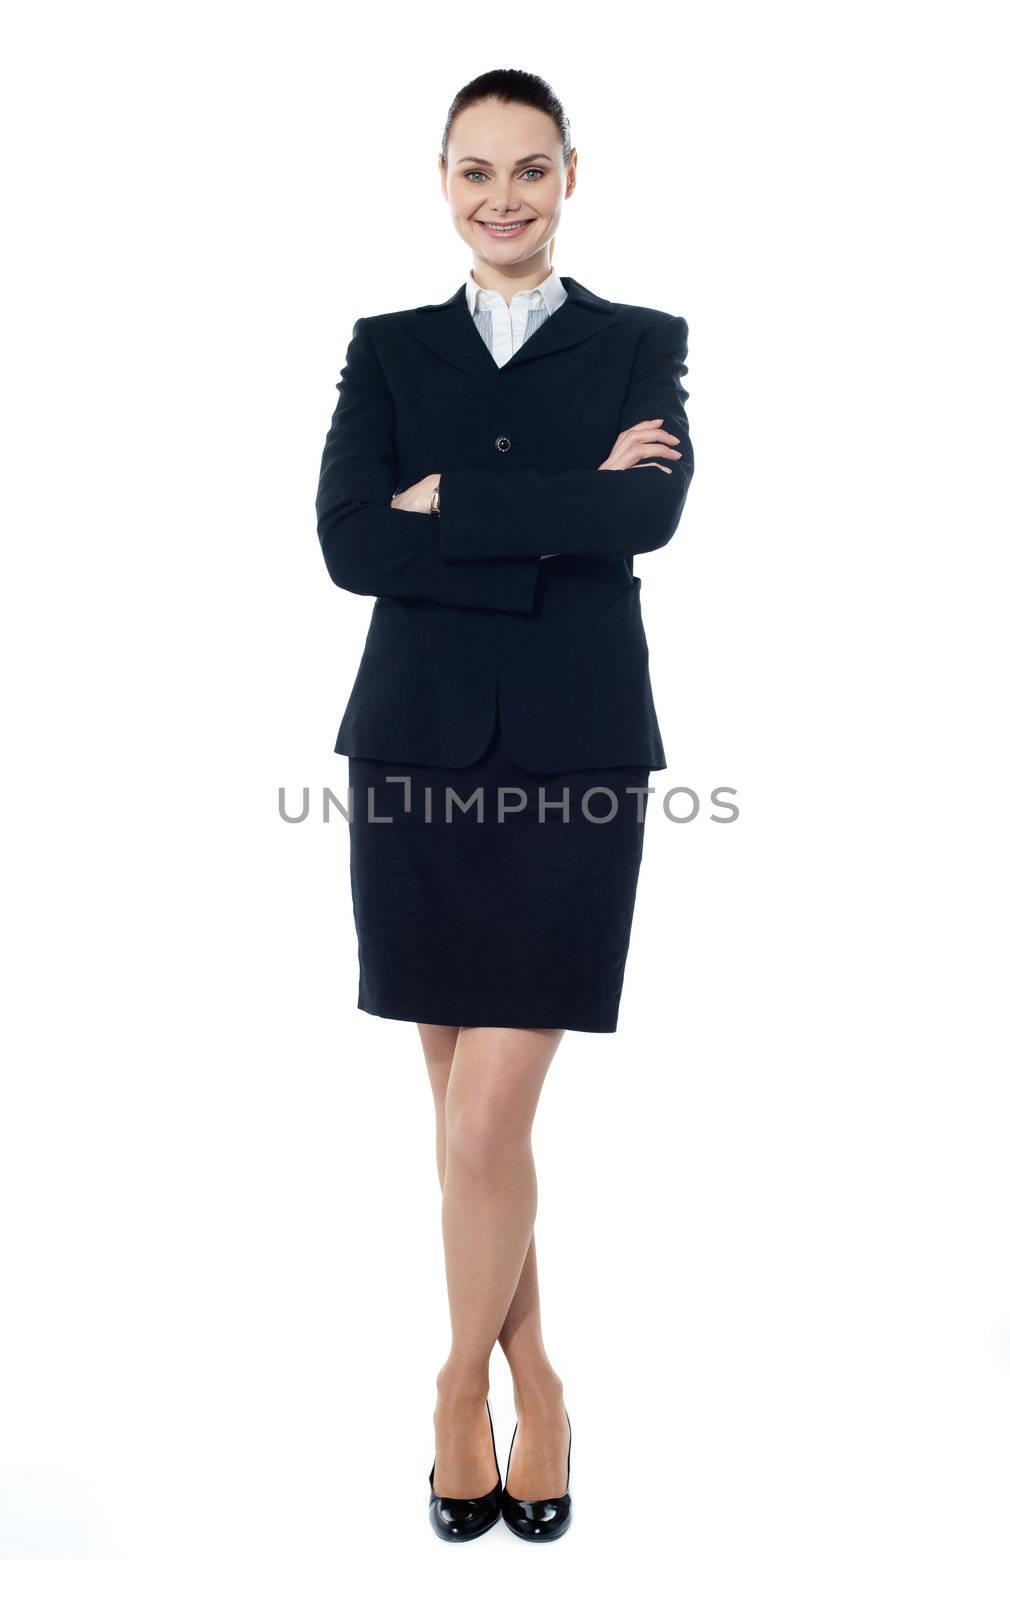 Smiling successful businesswoman posing with folded-arms and crossed legs